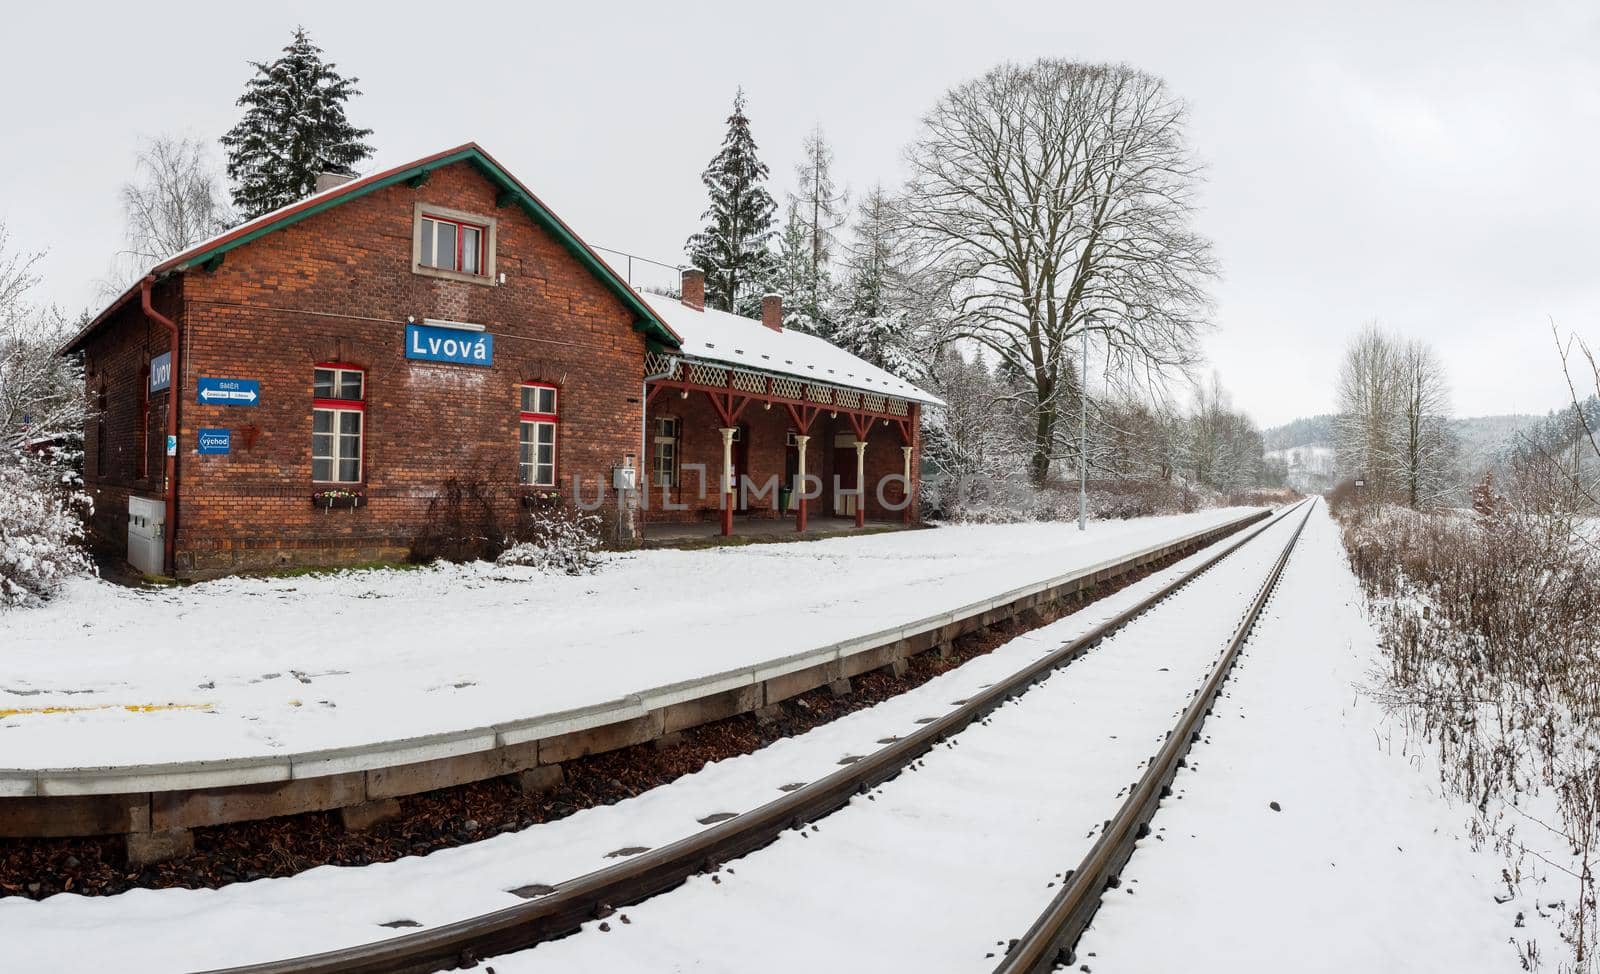 Historic single-track train station covered with fresh snow  by rdonar2